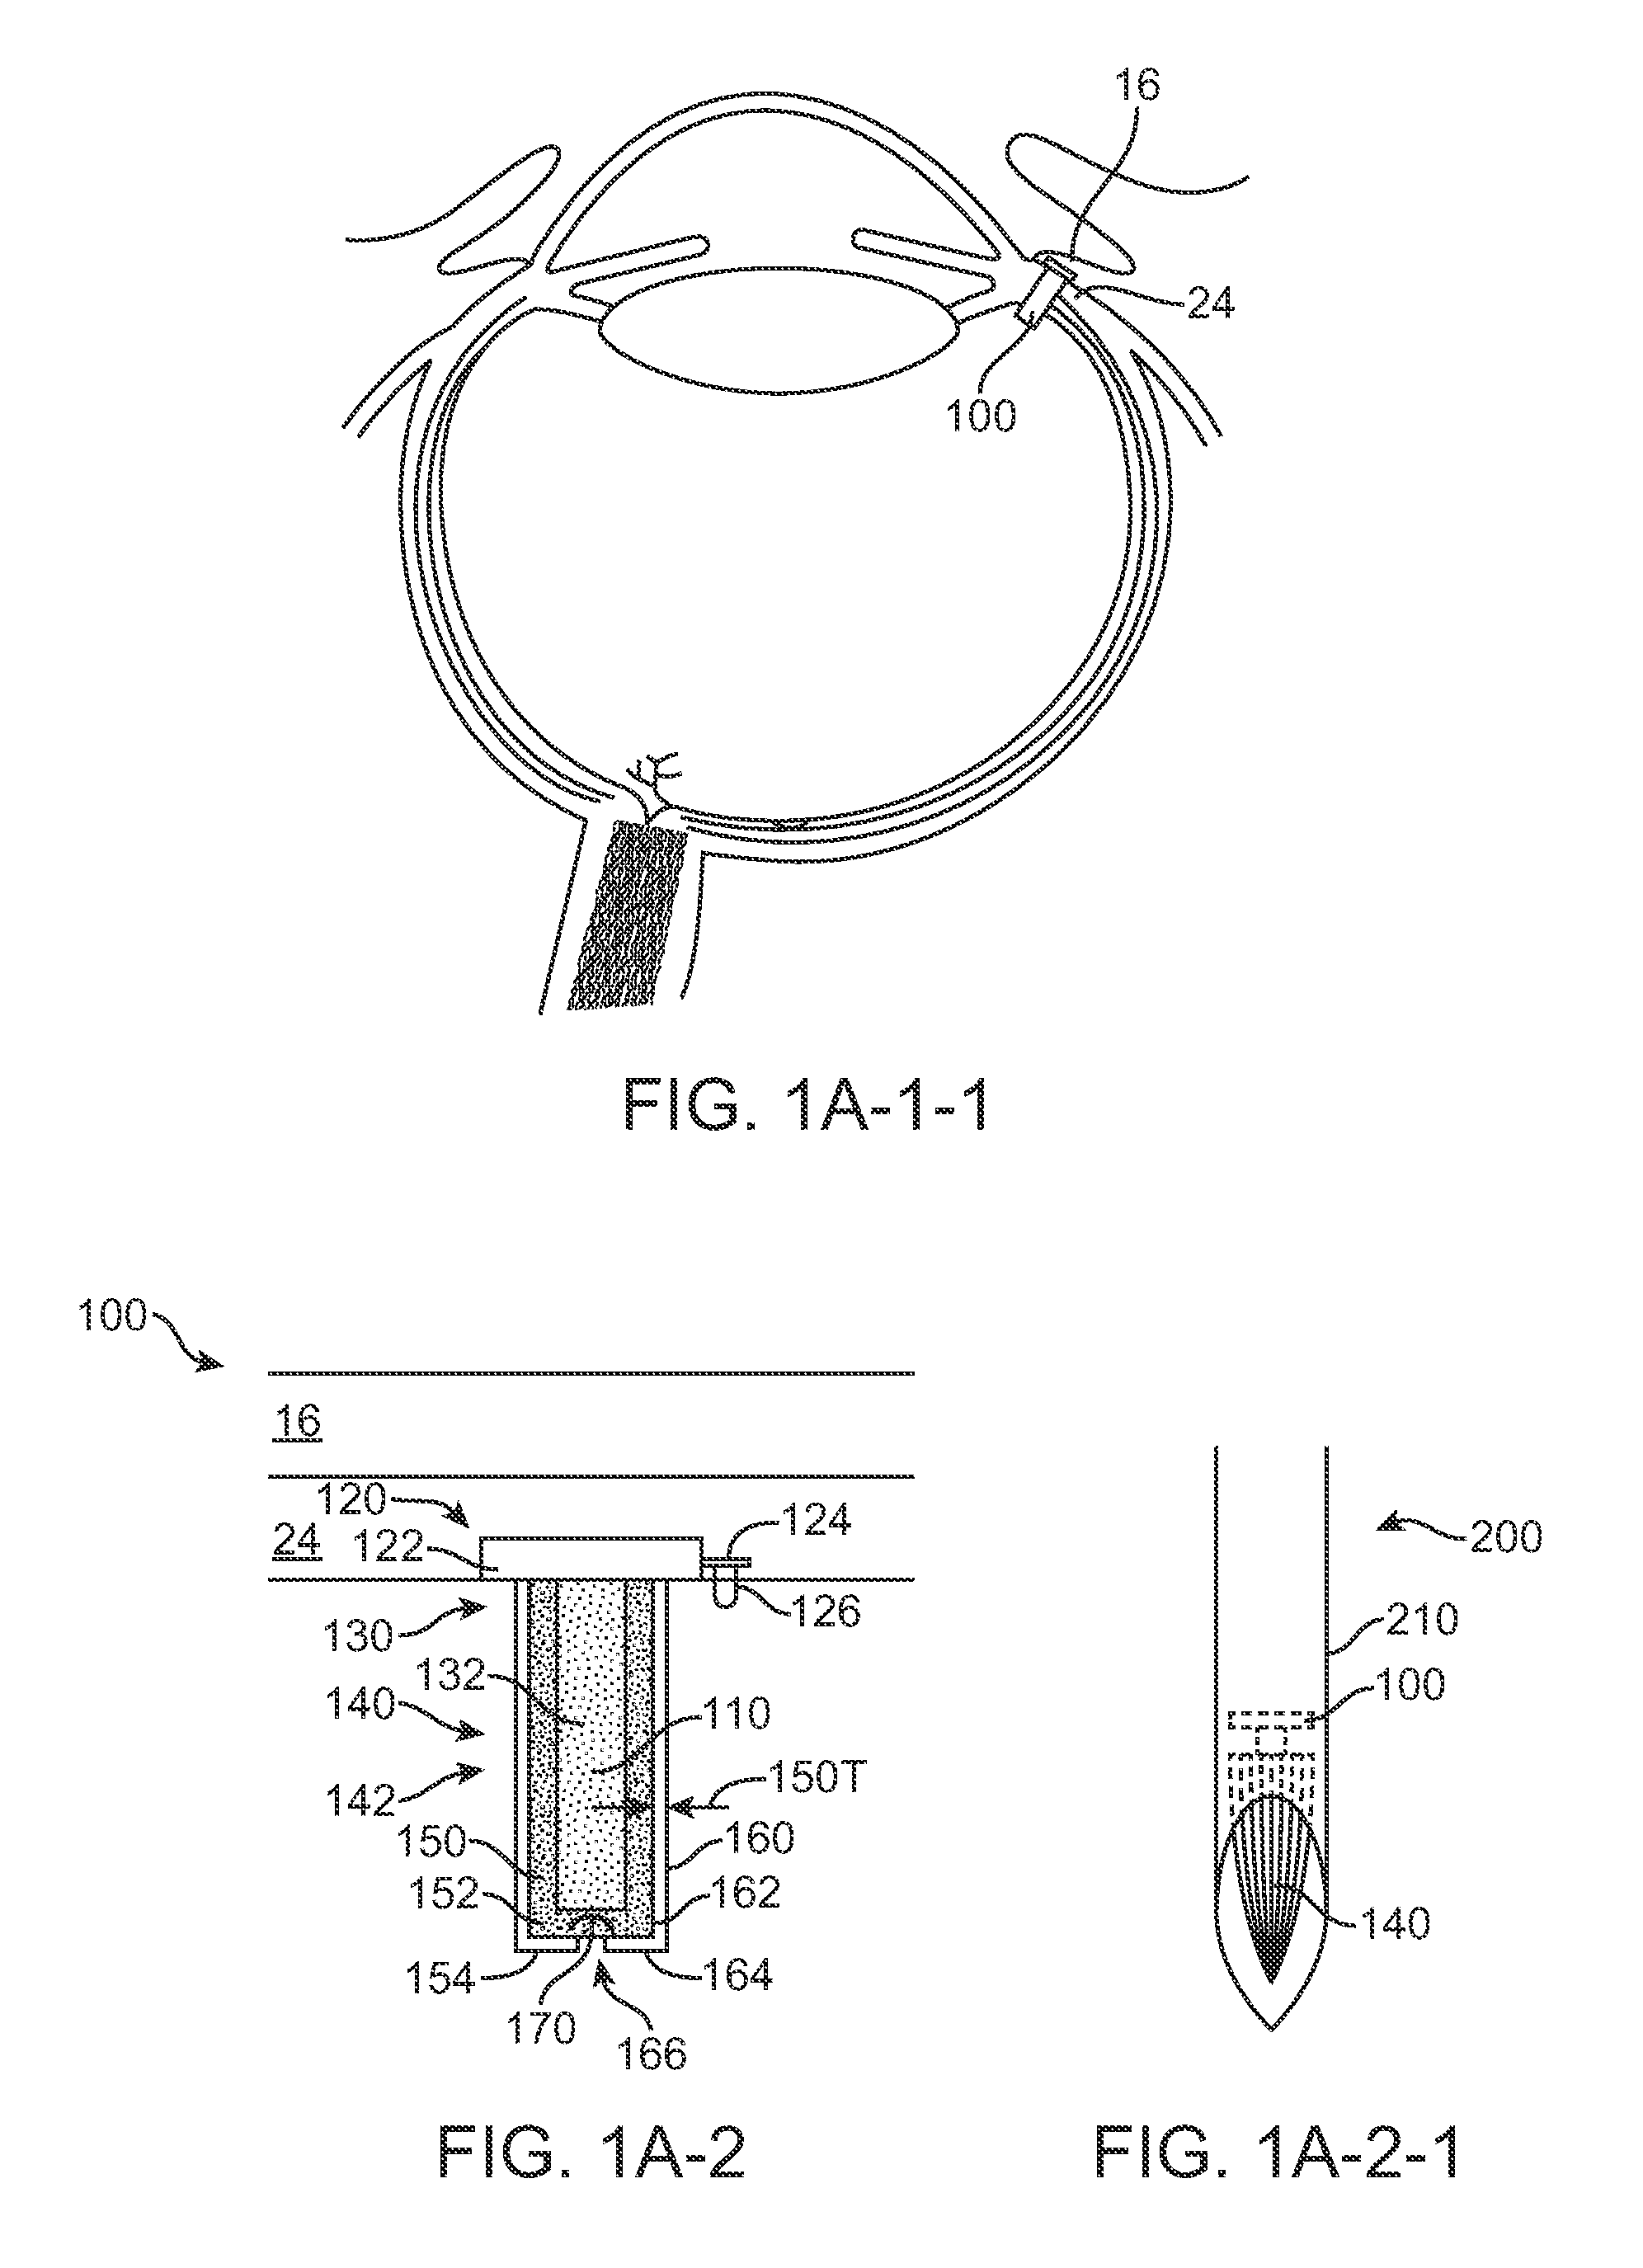 Injector apparatus and method for drug delivery